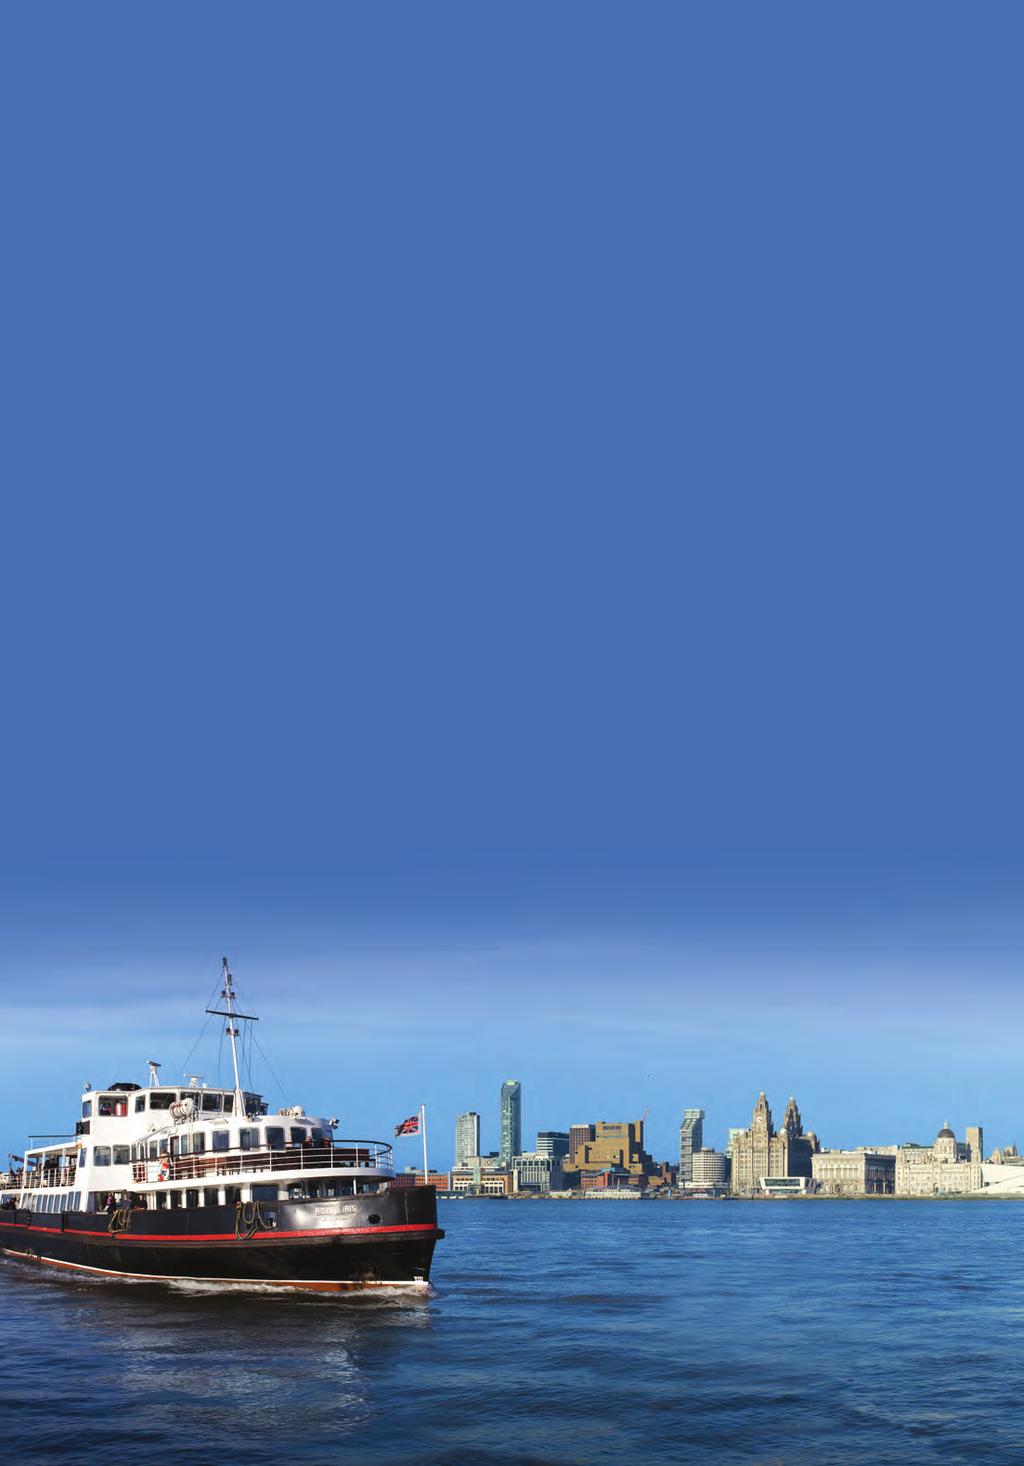 ABOUT MERSEY FERRIES, MERSEY FERRIES, LIVERPOOL LIVERPOOL Mersey Ferries is a must do North West attraction and the only way to see the world famous, unrivalled Mersey UNESCO Ferries world heritage